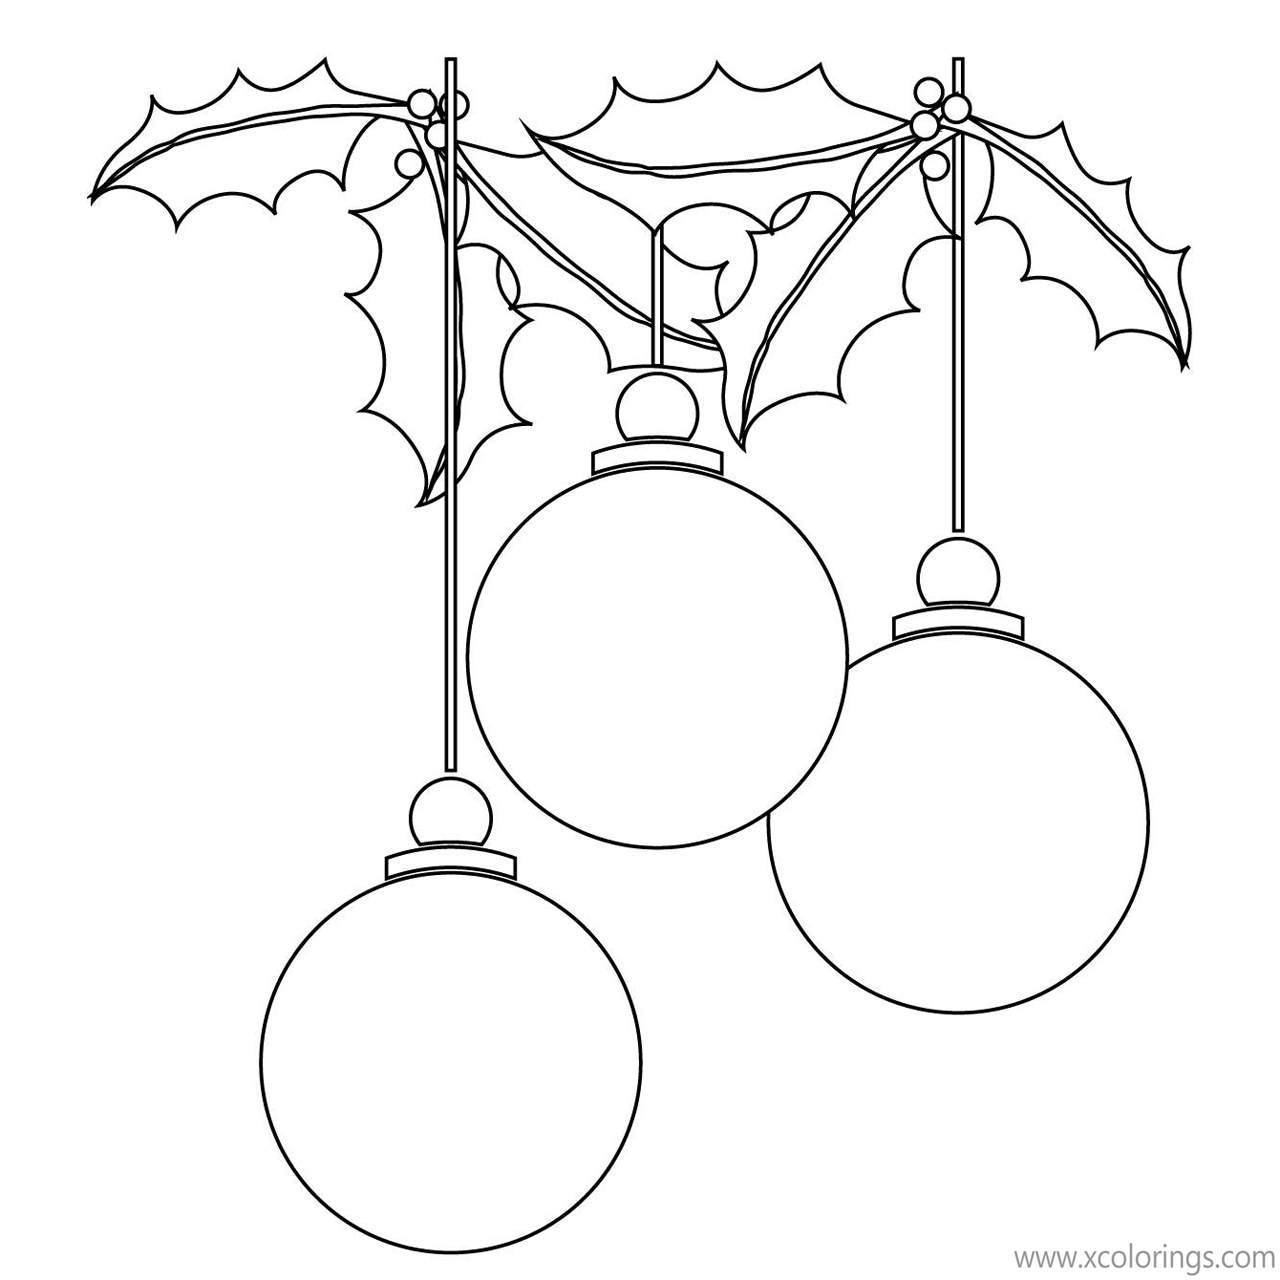 Free Blank Christmas Ornaments Coloring Pages for Kids printable